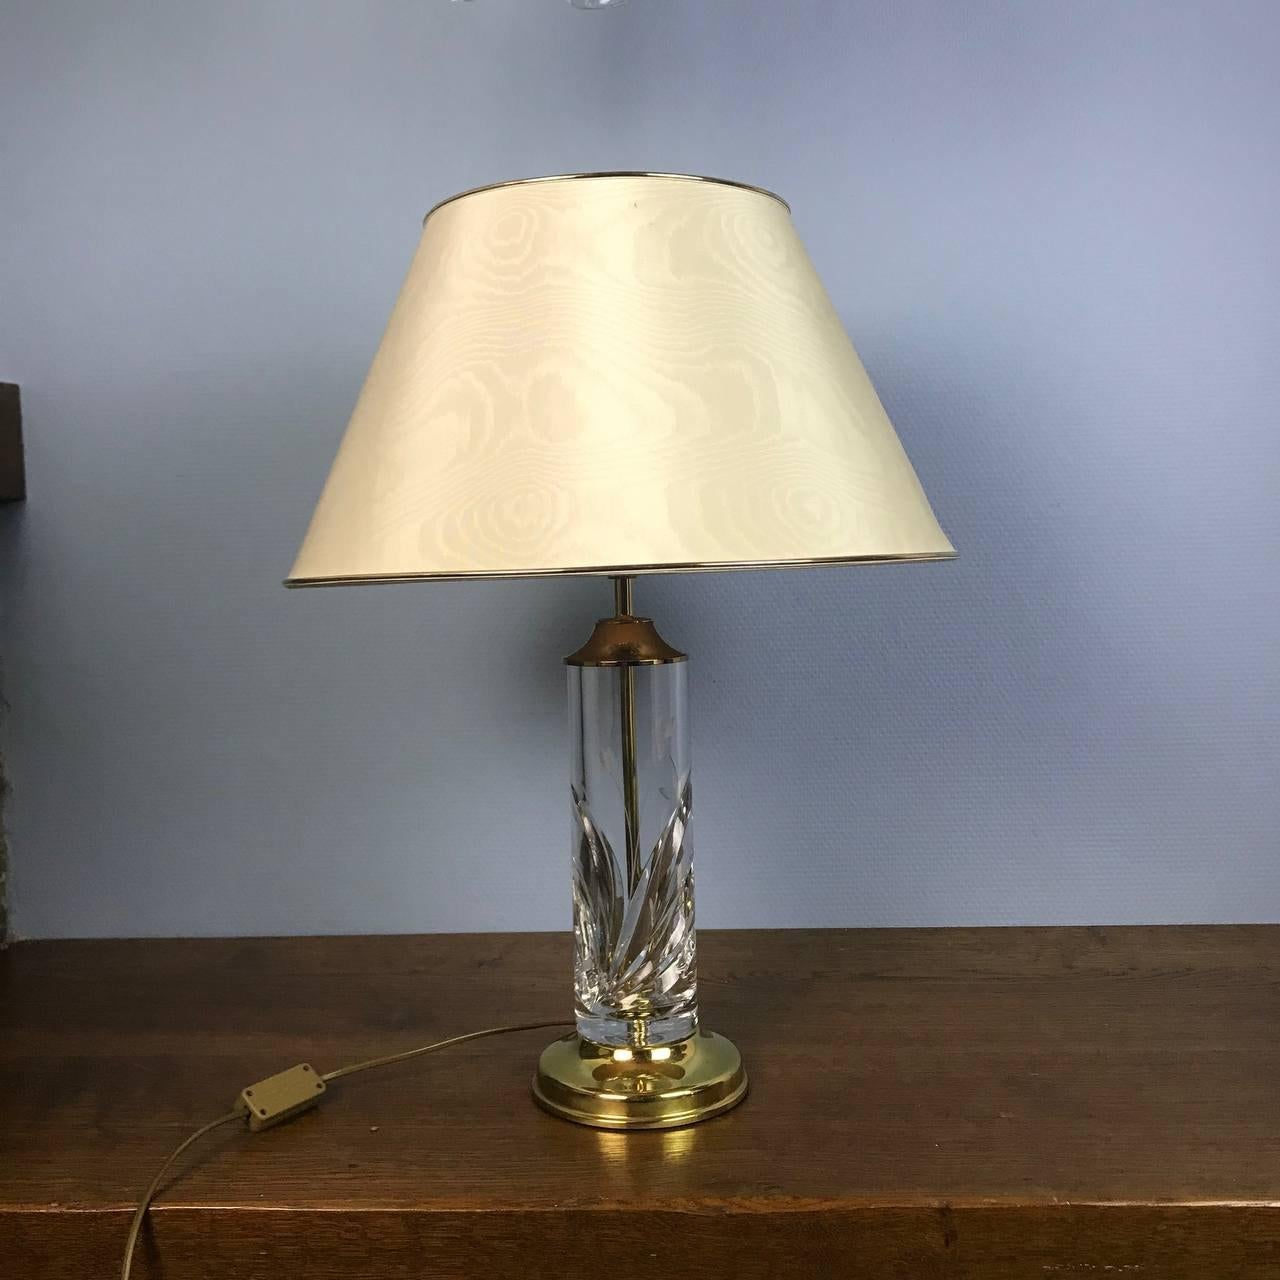 - Vintage table lamps from Nachtmann Leuchten, Germany
- Made of crystall and gold plated brass
- Circa 2000s.